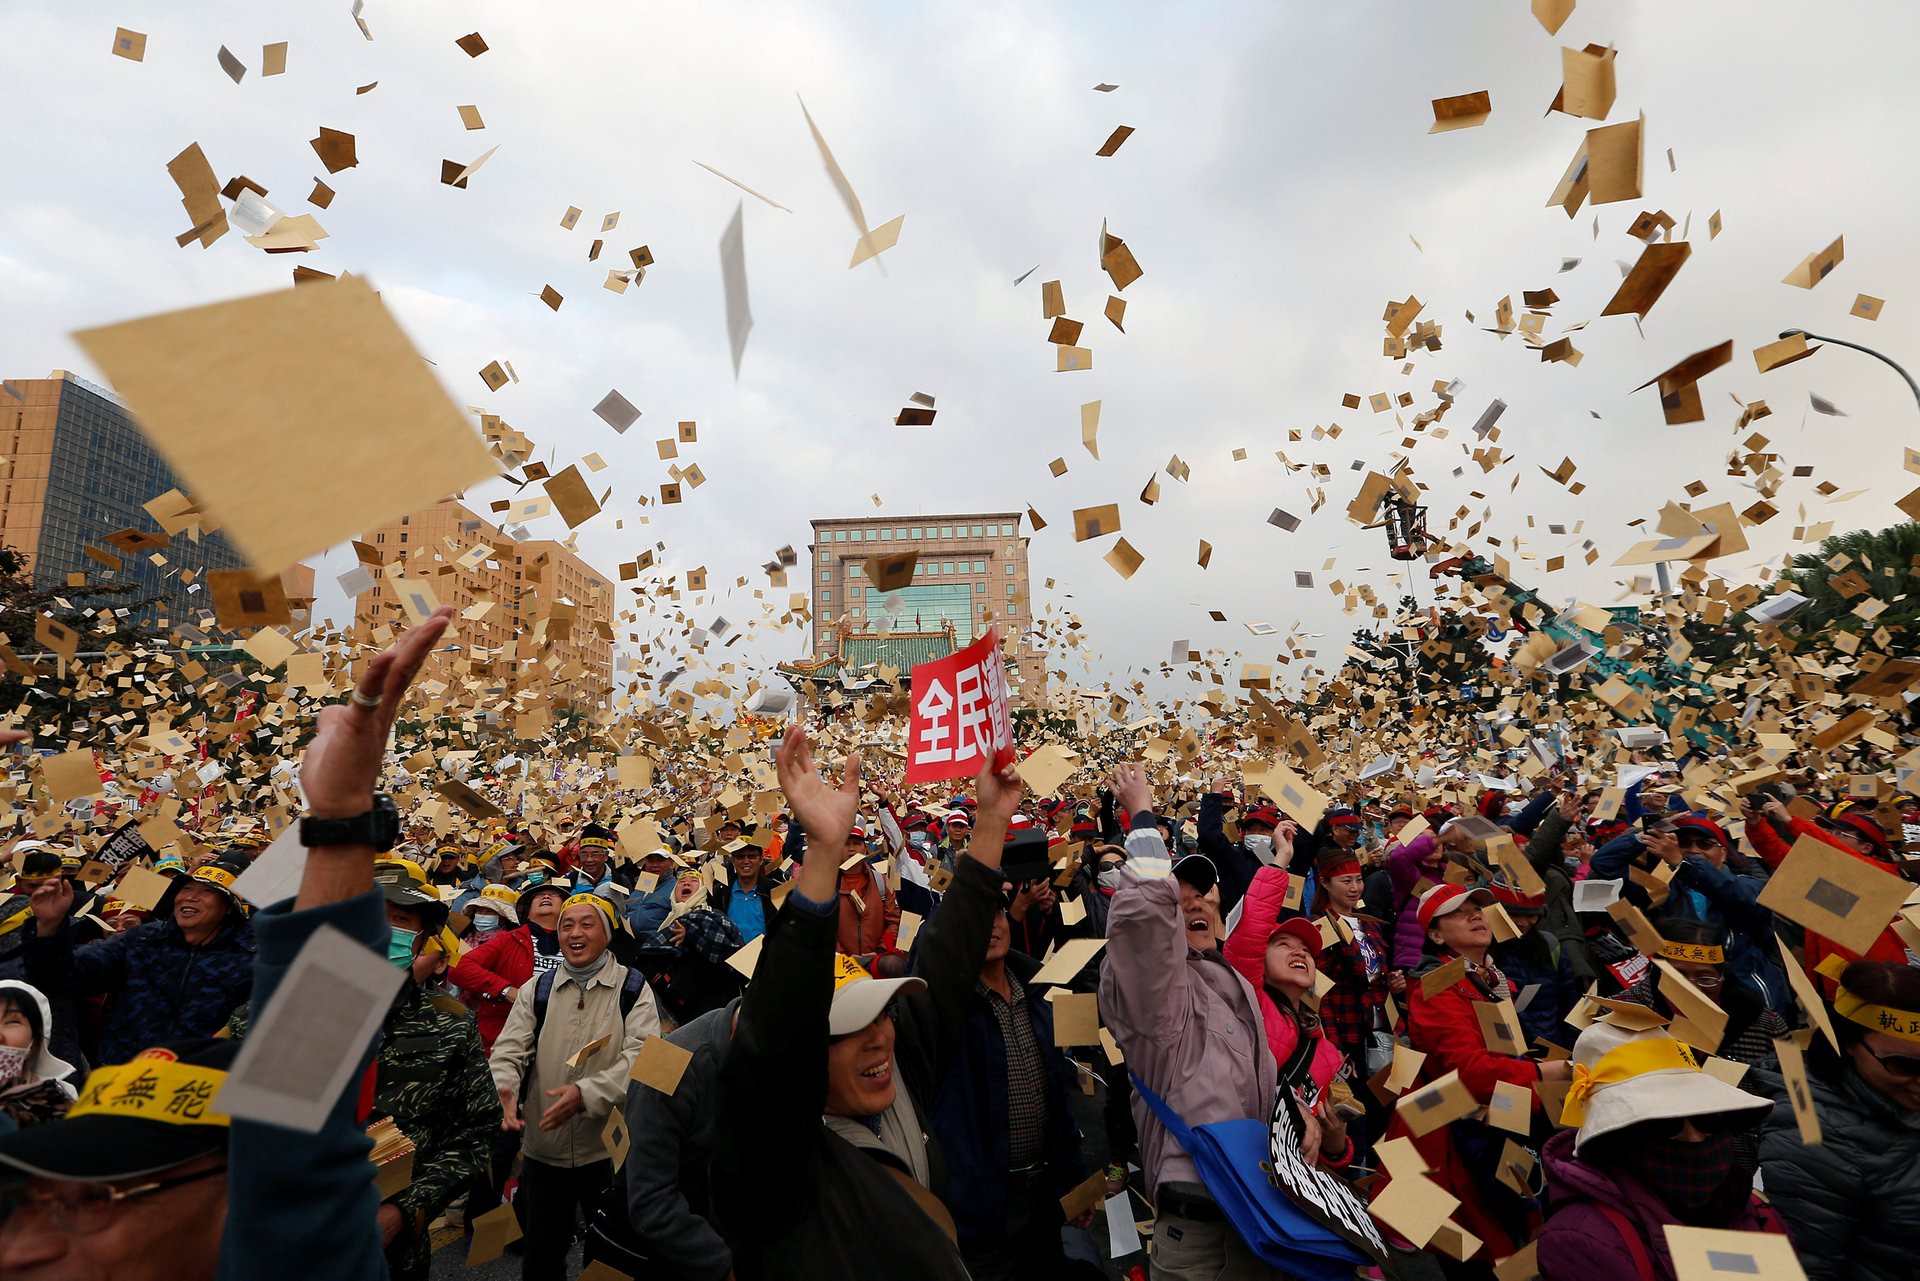 Protesters throw hell money, fake banknotes burnt at funerals, during a rally against the overhaul of the military and civil service pension fund. PHOTO: REUTERS